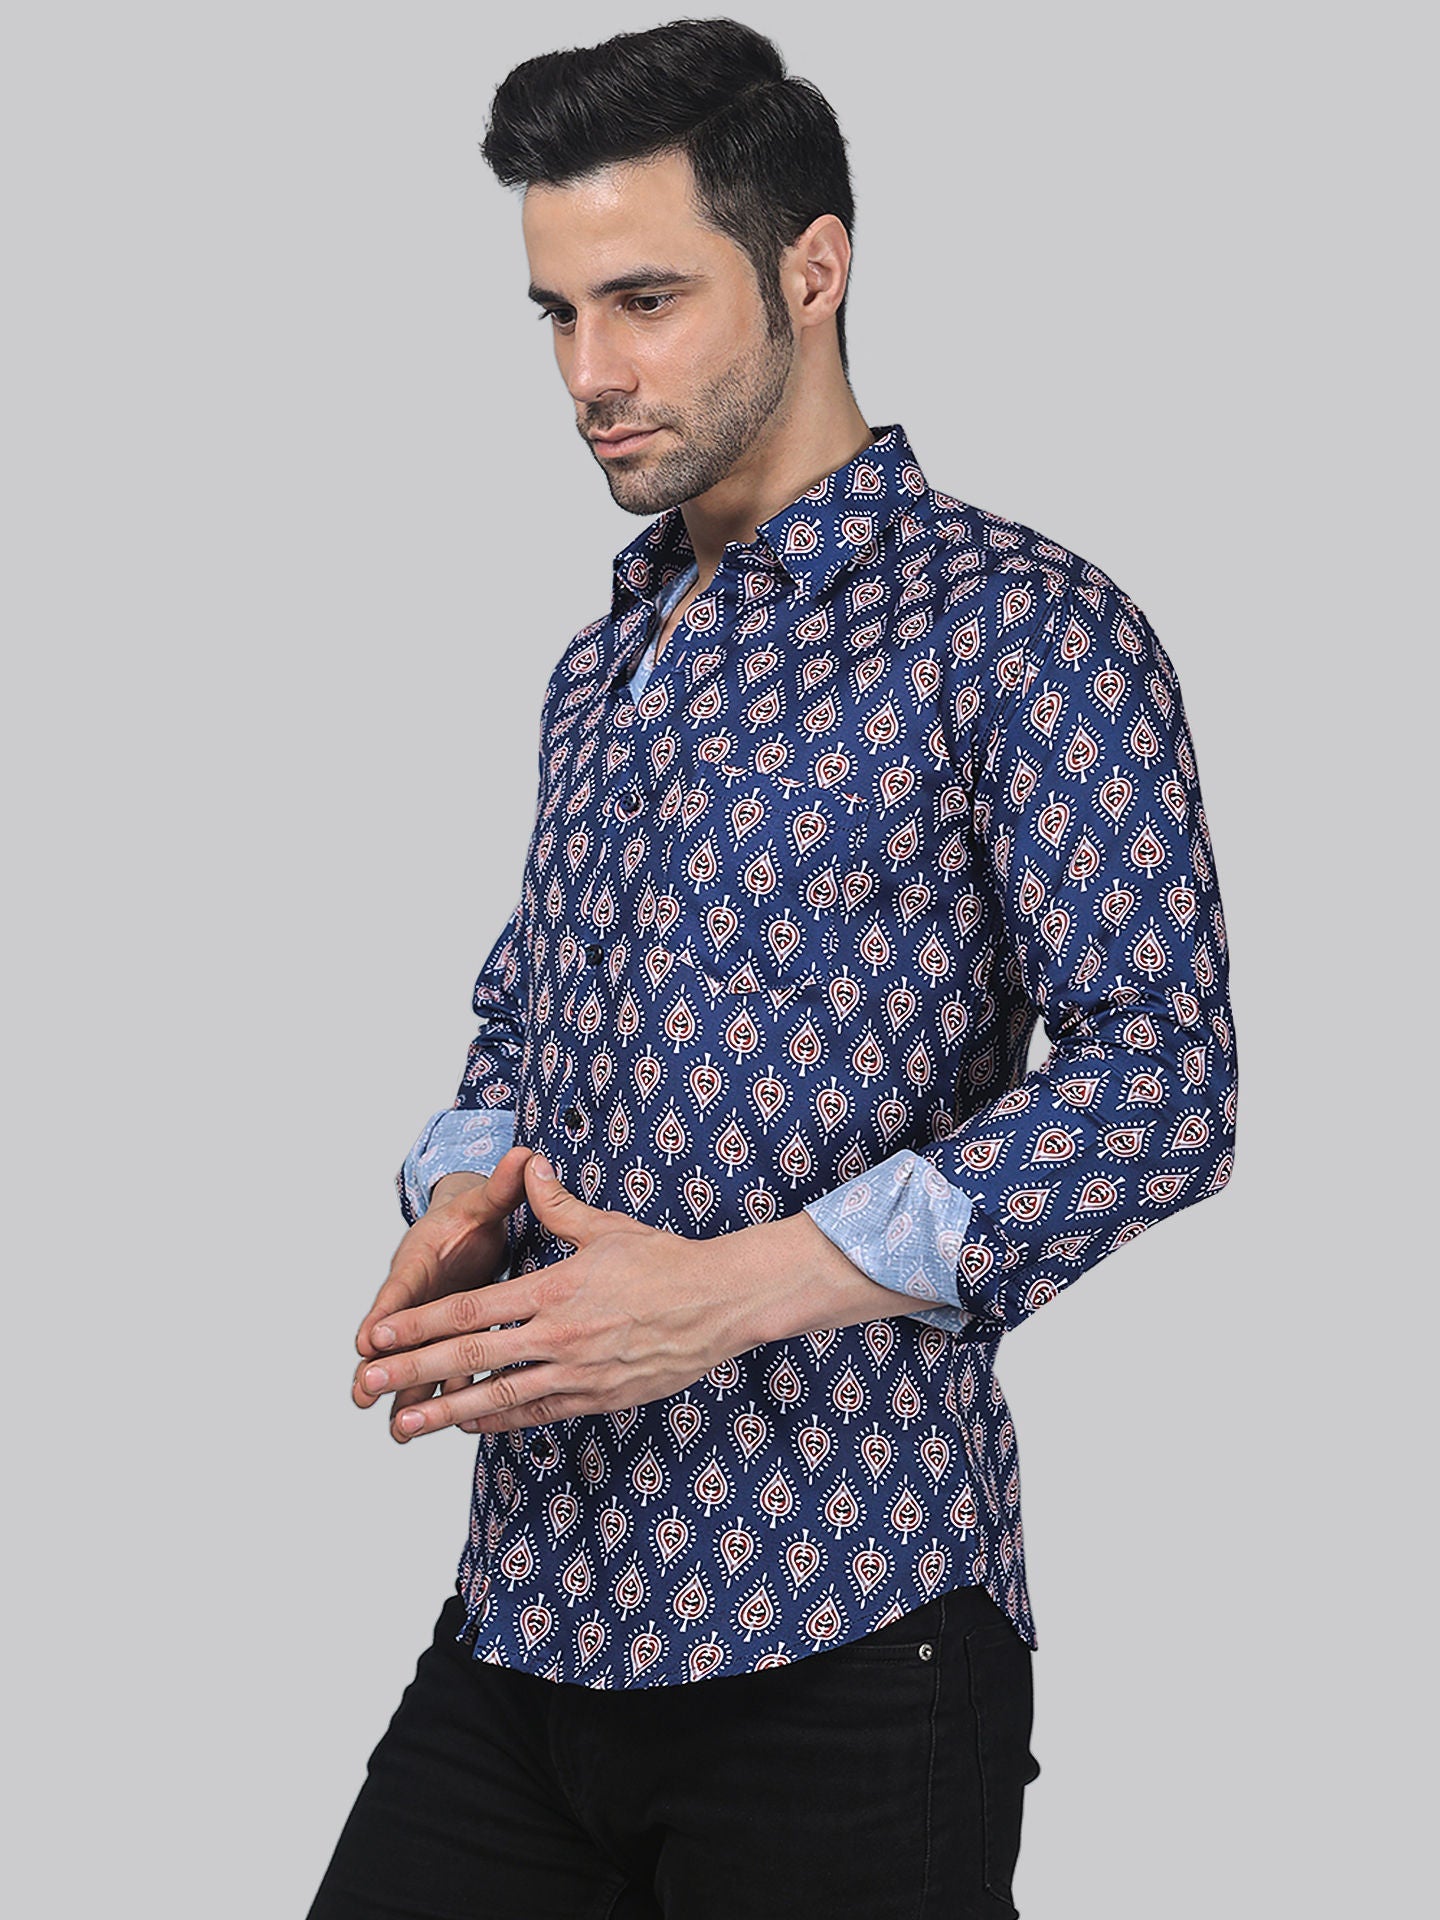 Majestic Marble Men's Printed Full Sleeve Casual Linen Shirt - TryBuy® USA🇺🇸